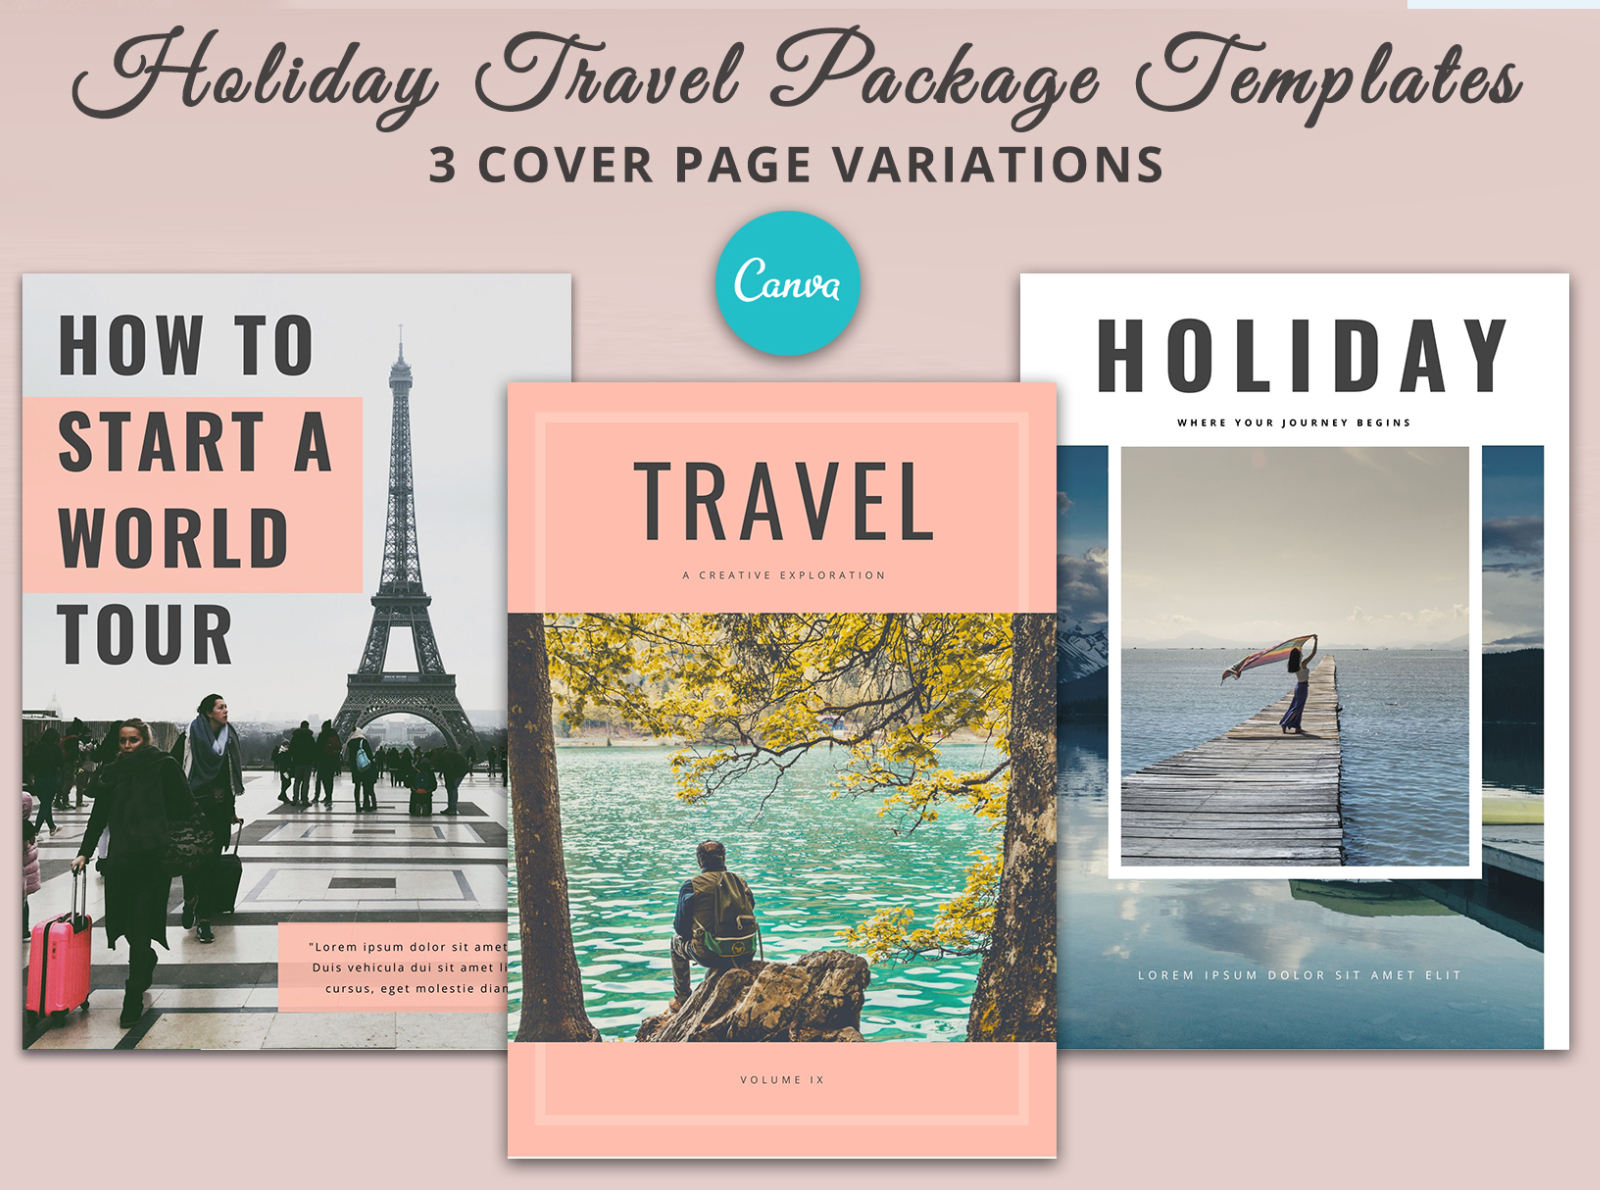 holiday-travel-package-canva-templates-by-pennyblack-templates-on